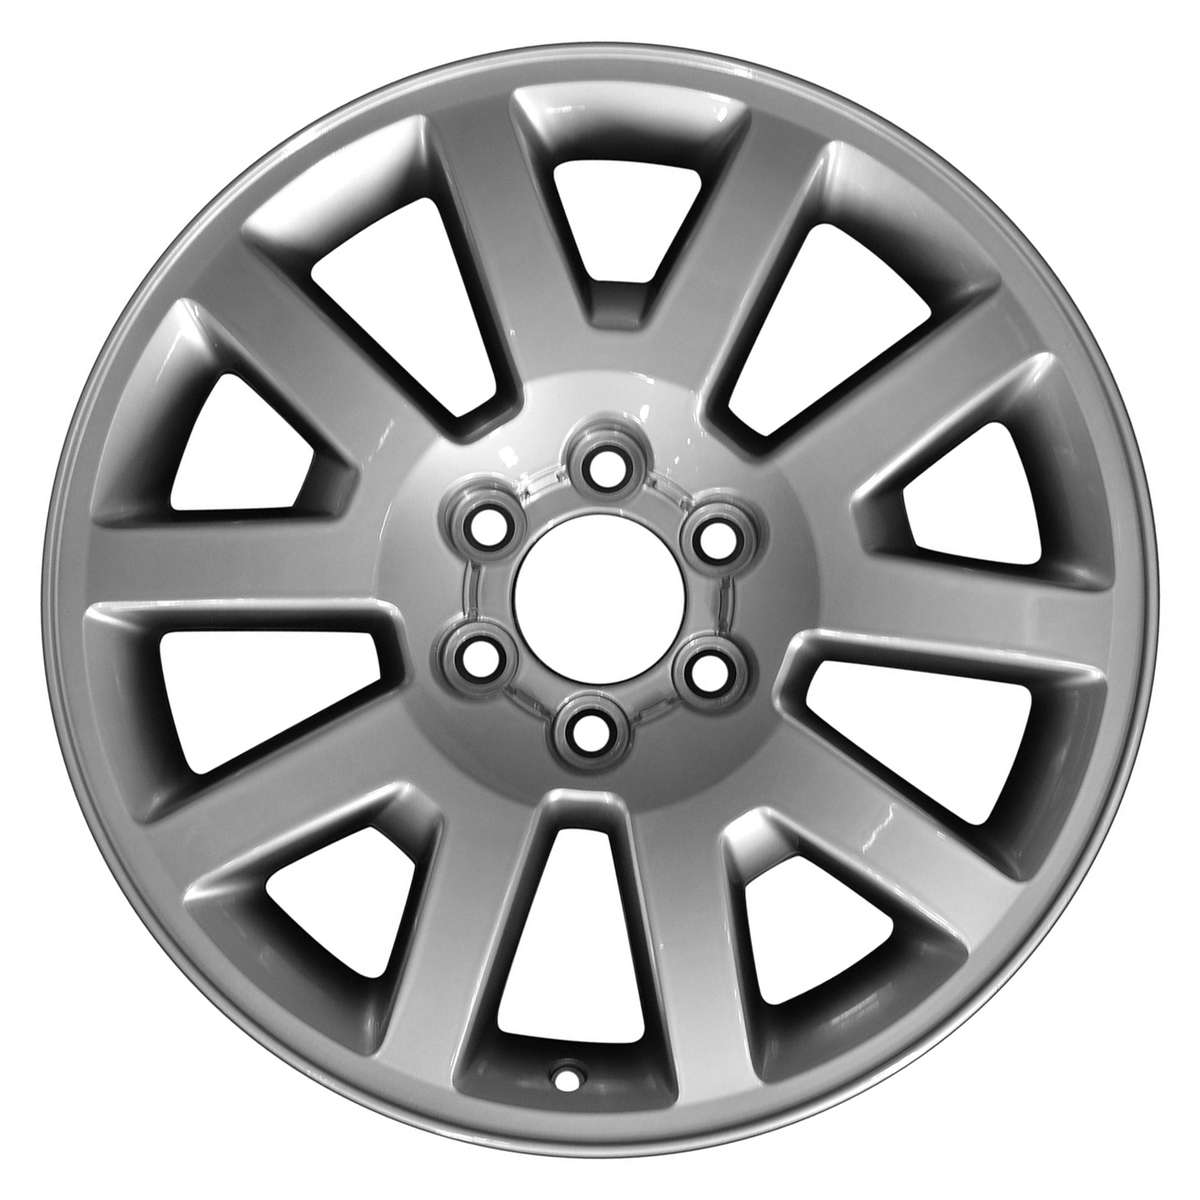 2011 Ford Expedition 20" OEM Wheel Rim W3789S